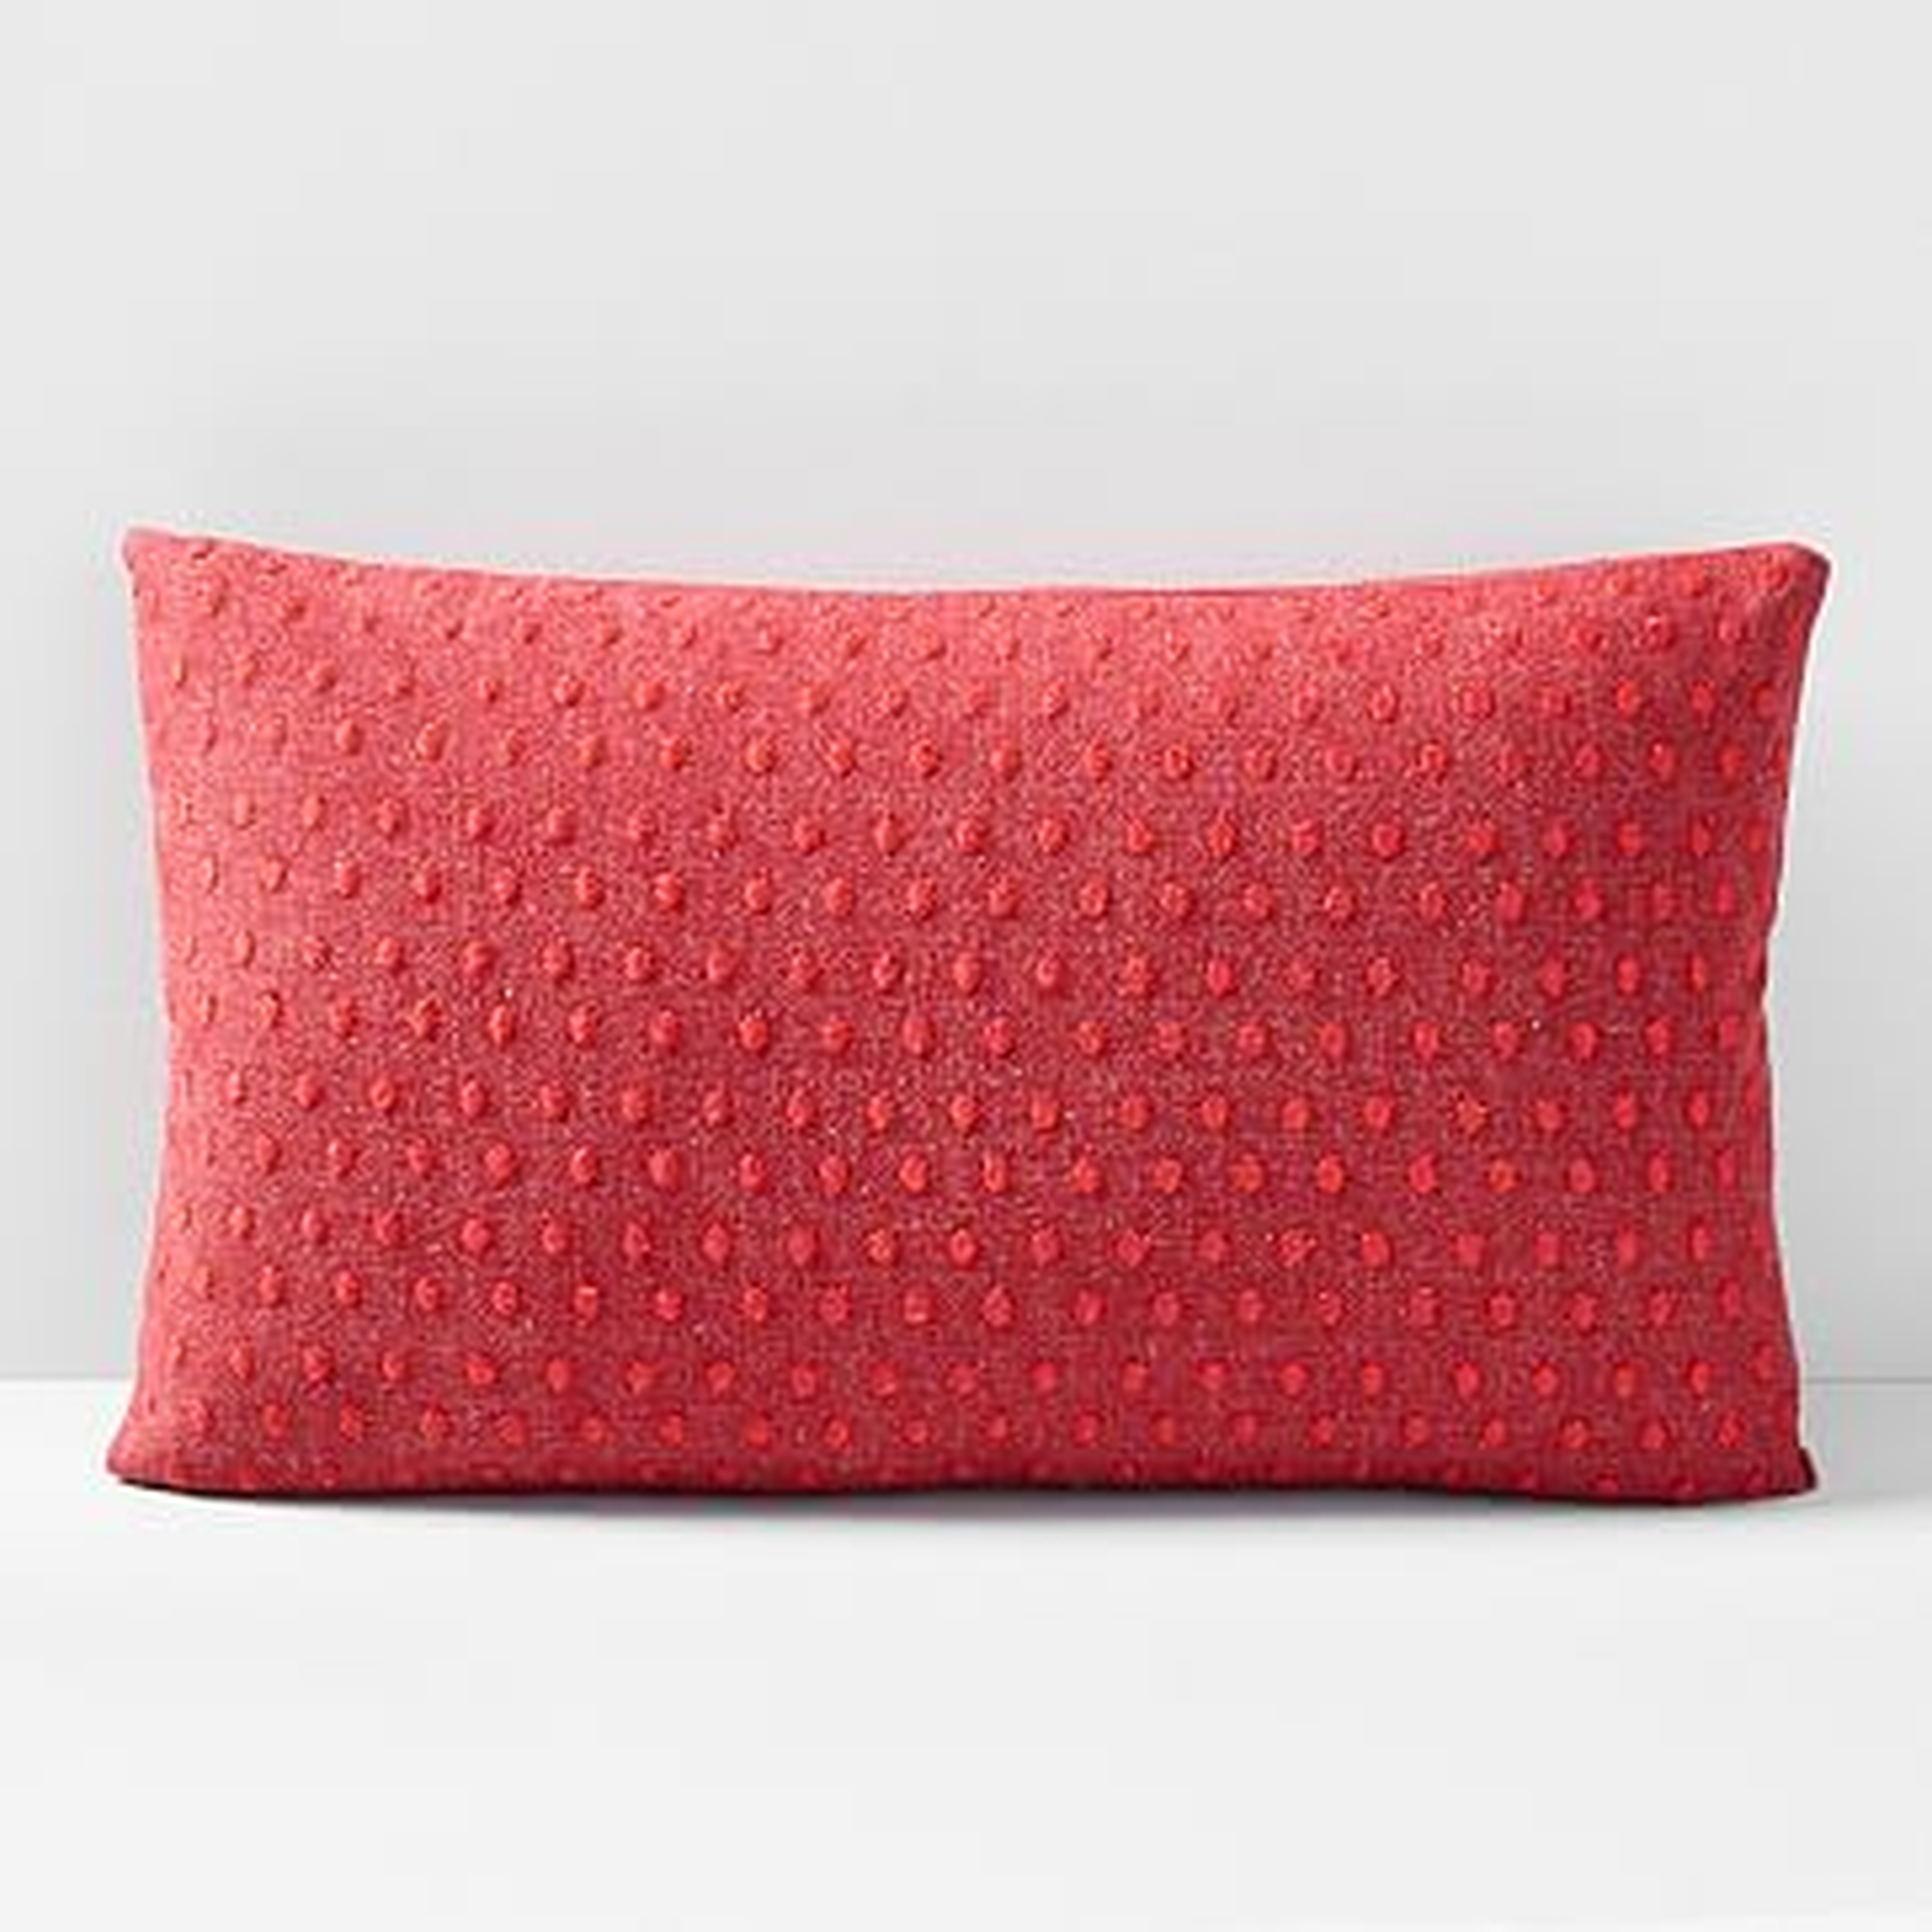 Embroidered Dot Pillow Cover, 12"x21", City Red - West Elm